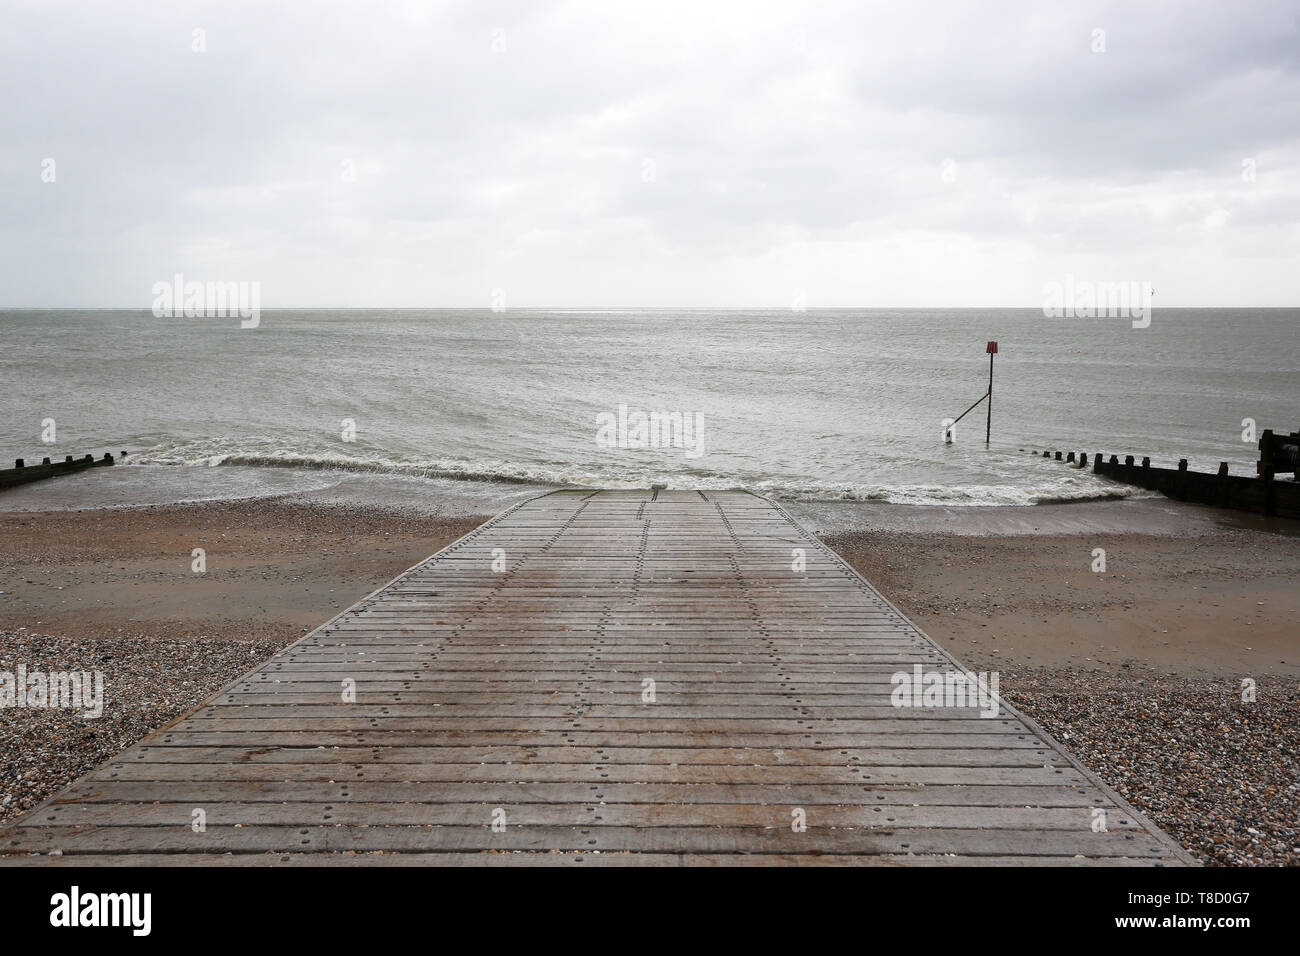 General views of the Selsey Boat Ramp, West Sussex, UK. Stock Photo